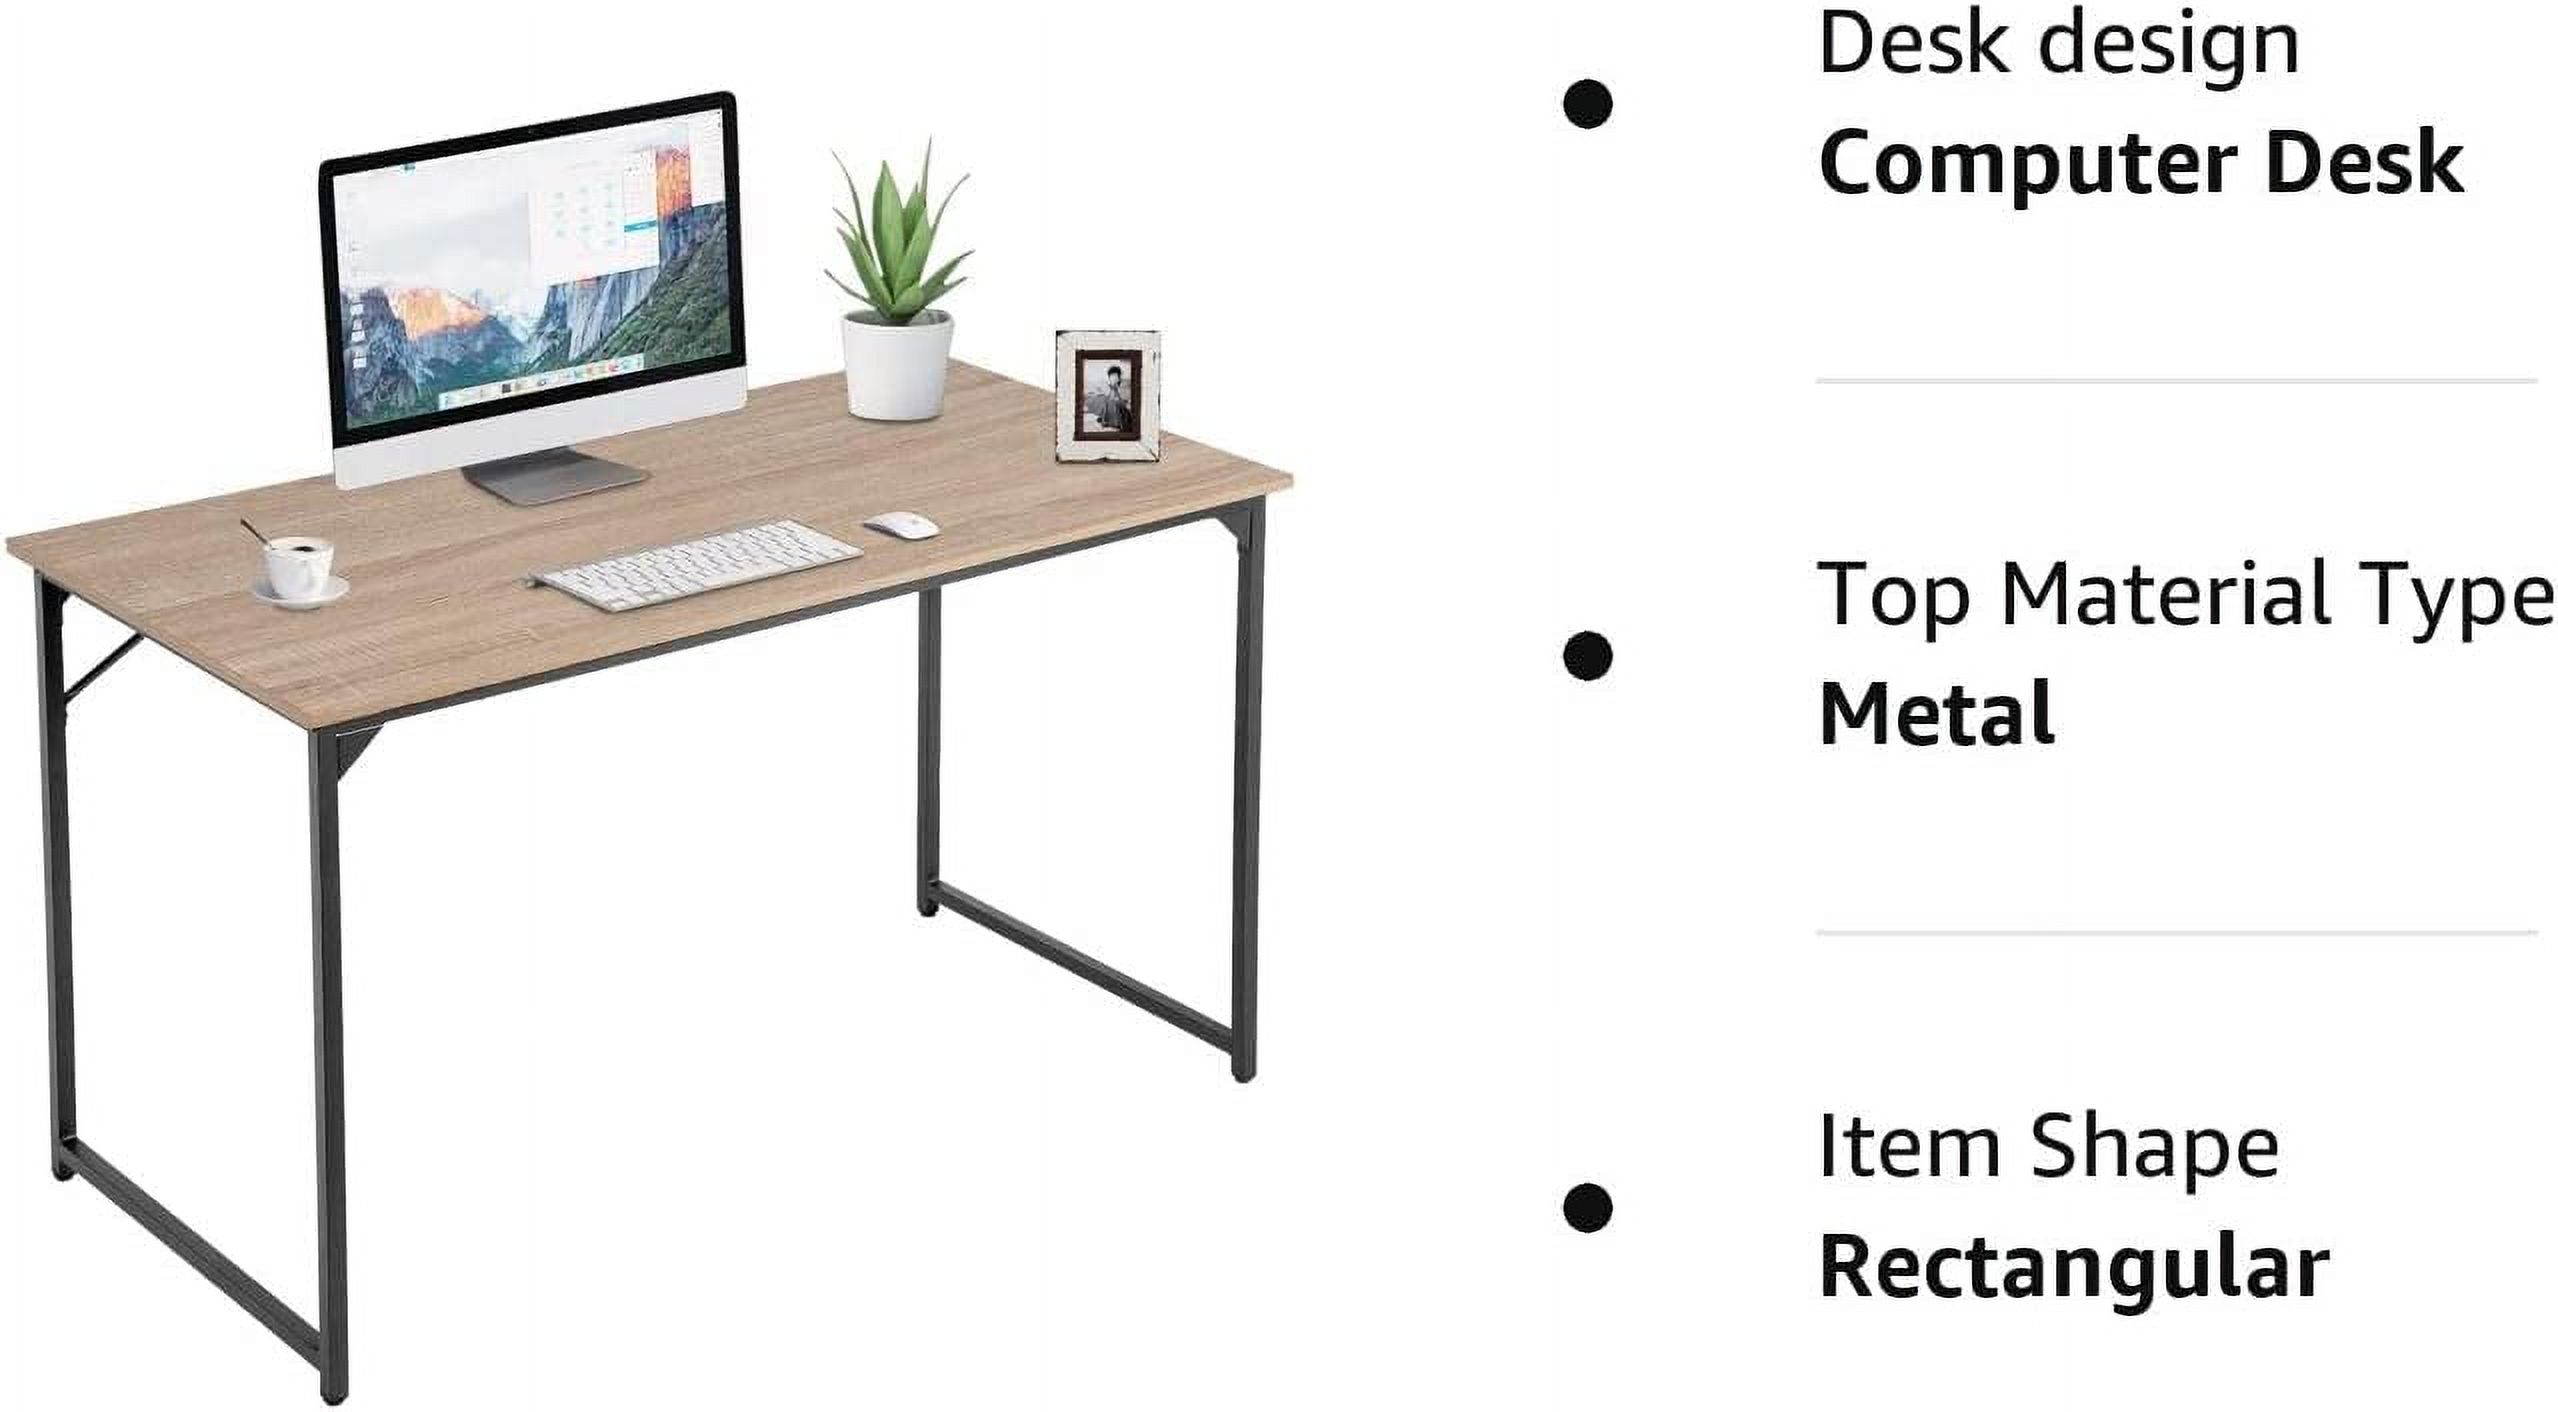 PayLessHere 47 inch Computer Desk Modern Writing Desk for Adults,Nature - image 3 of 8